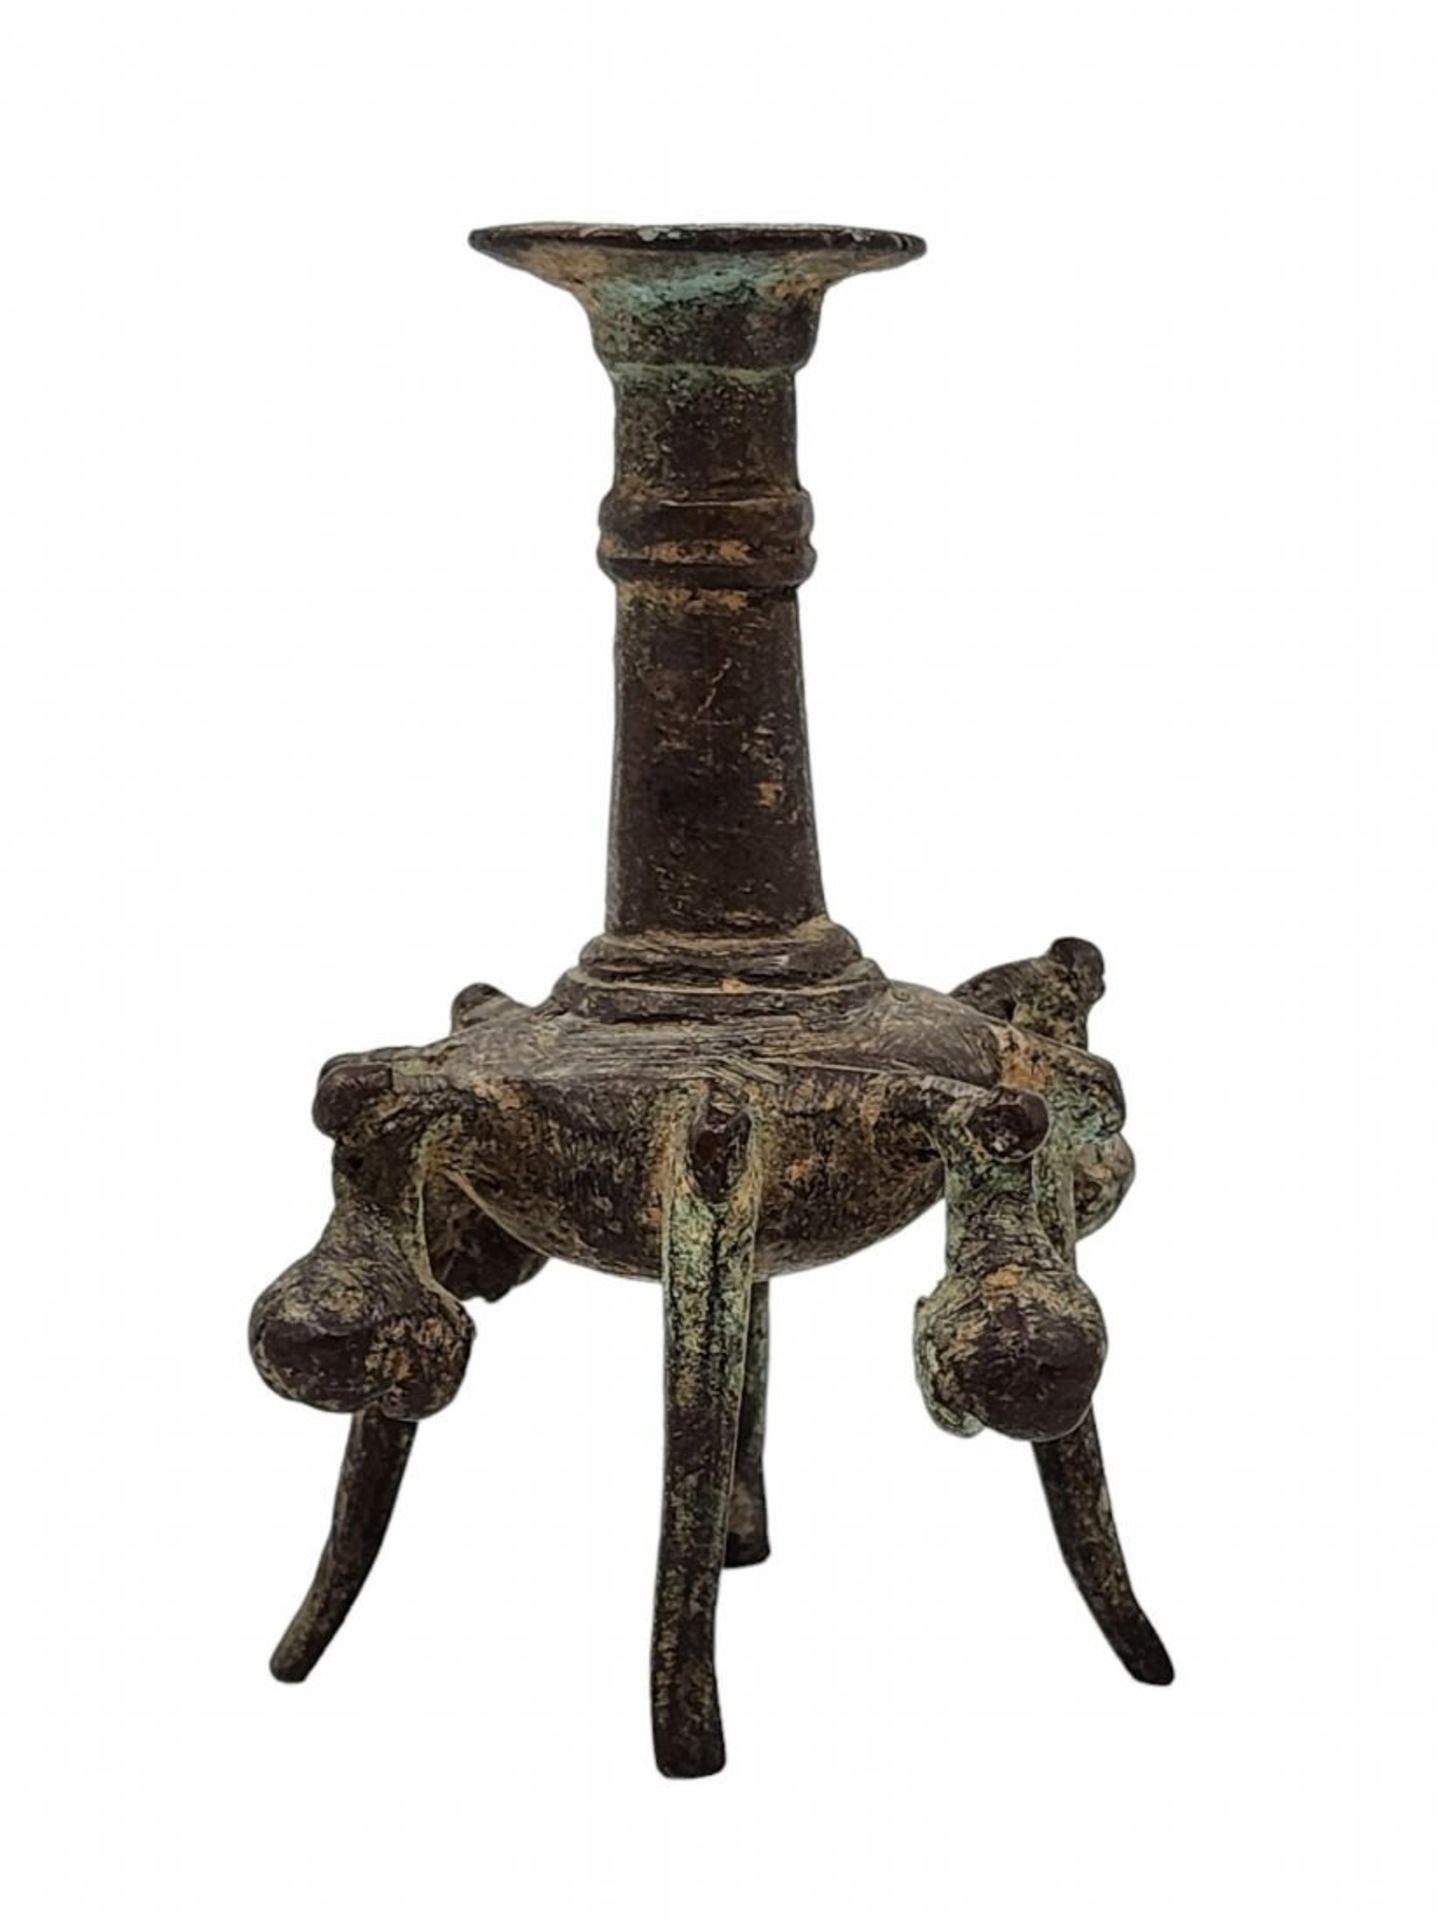 An antique Indian vessel for cosmetics, made of bronze, 18th century, Height: 14 cm, Width: 10 cm. - Image 4 of 5